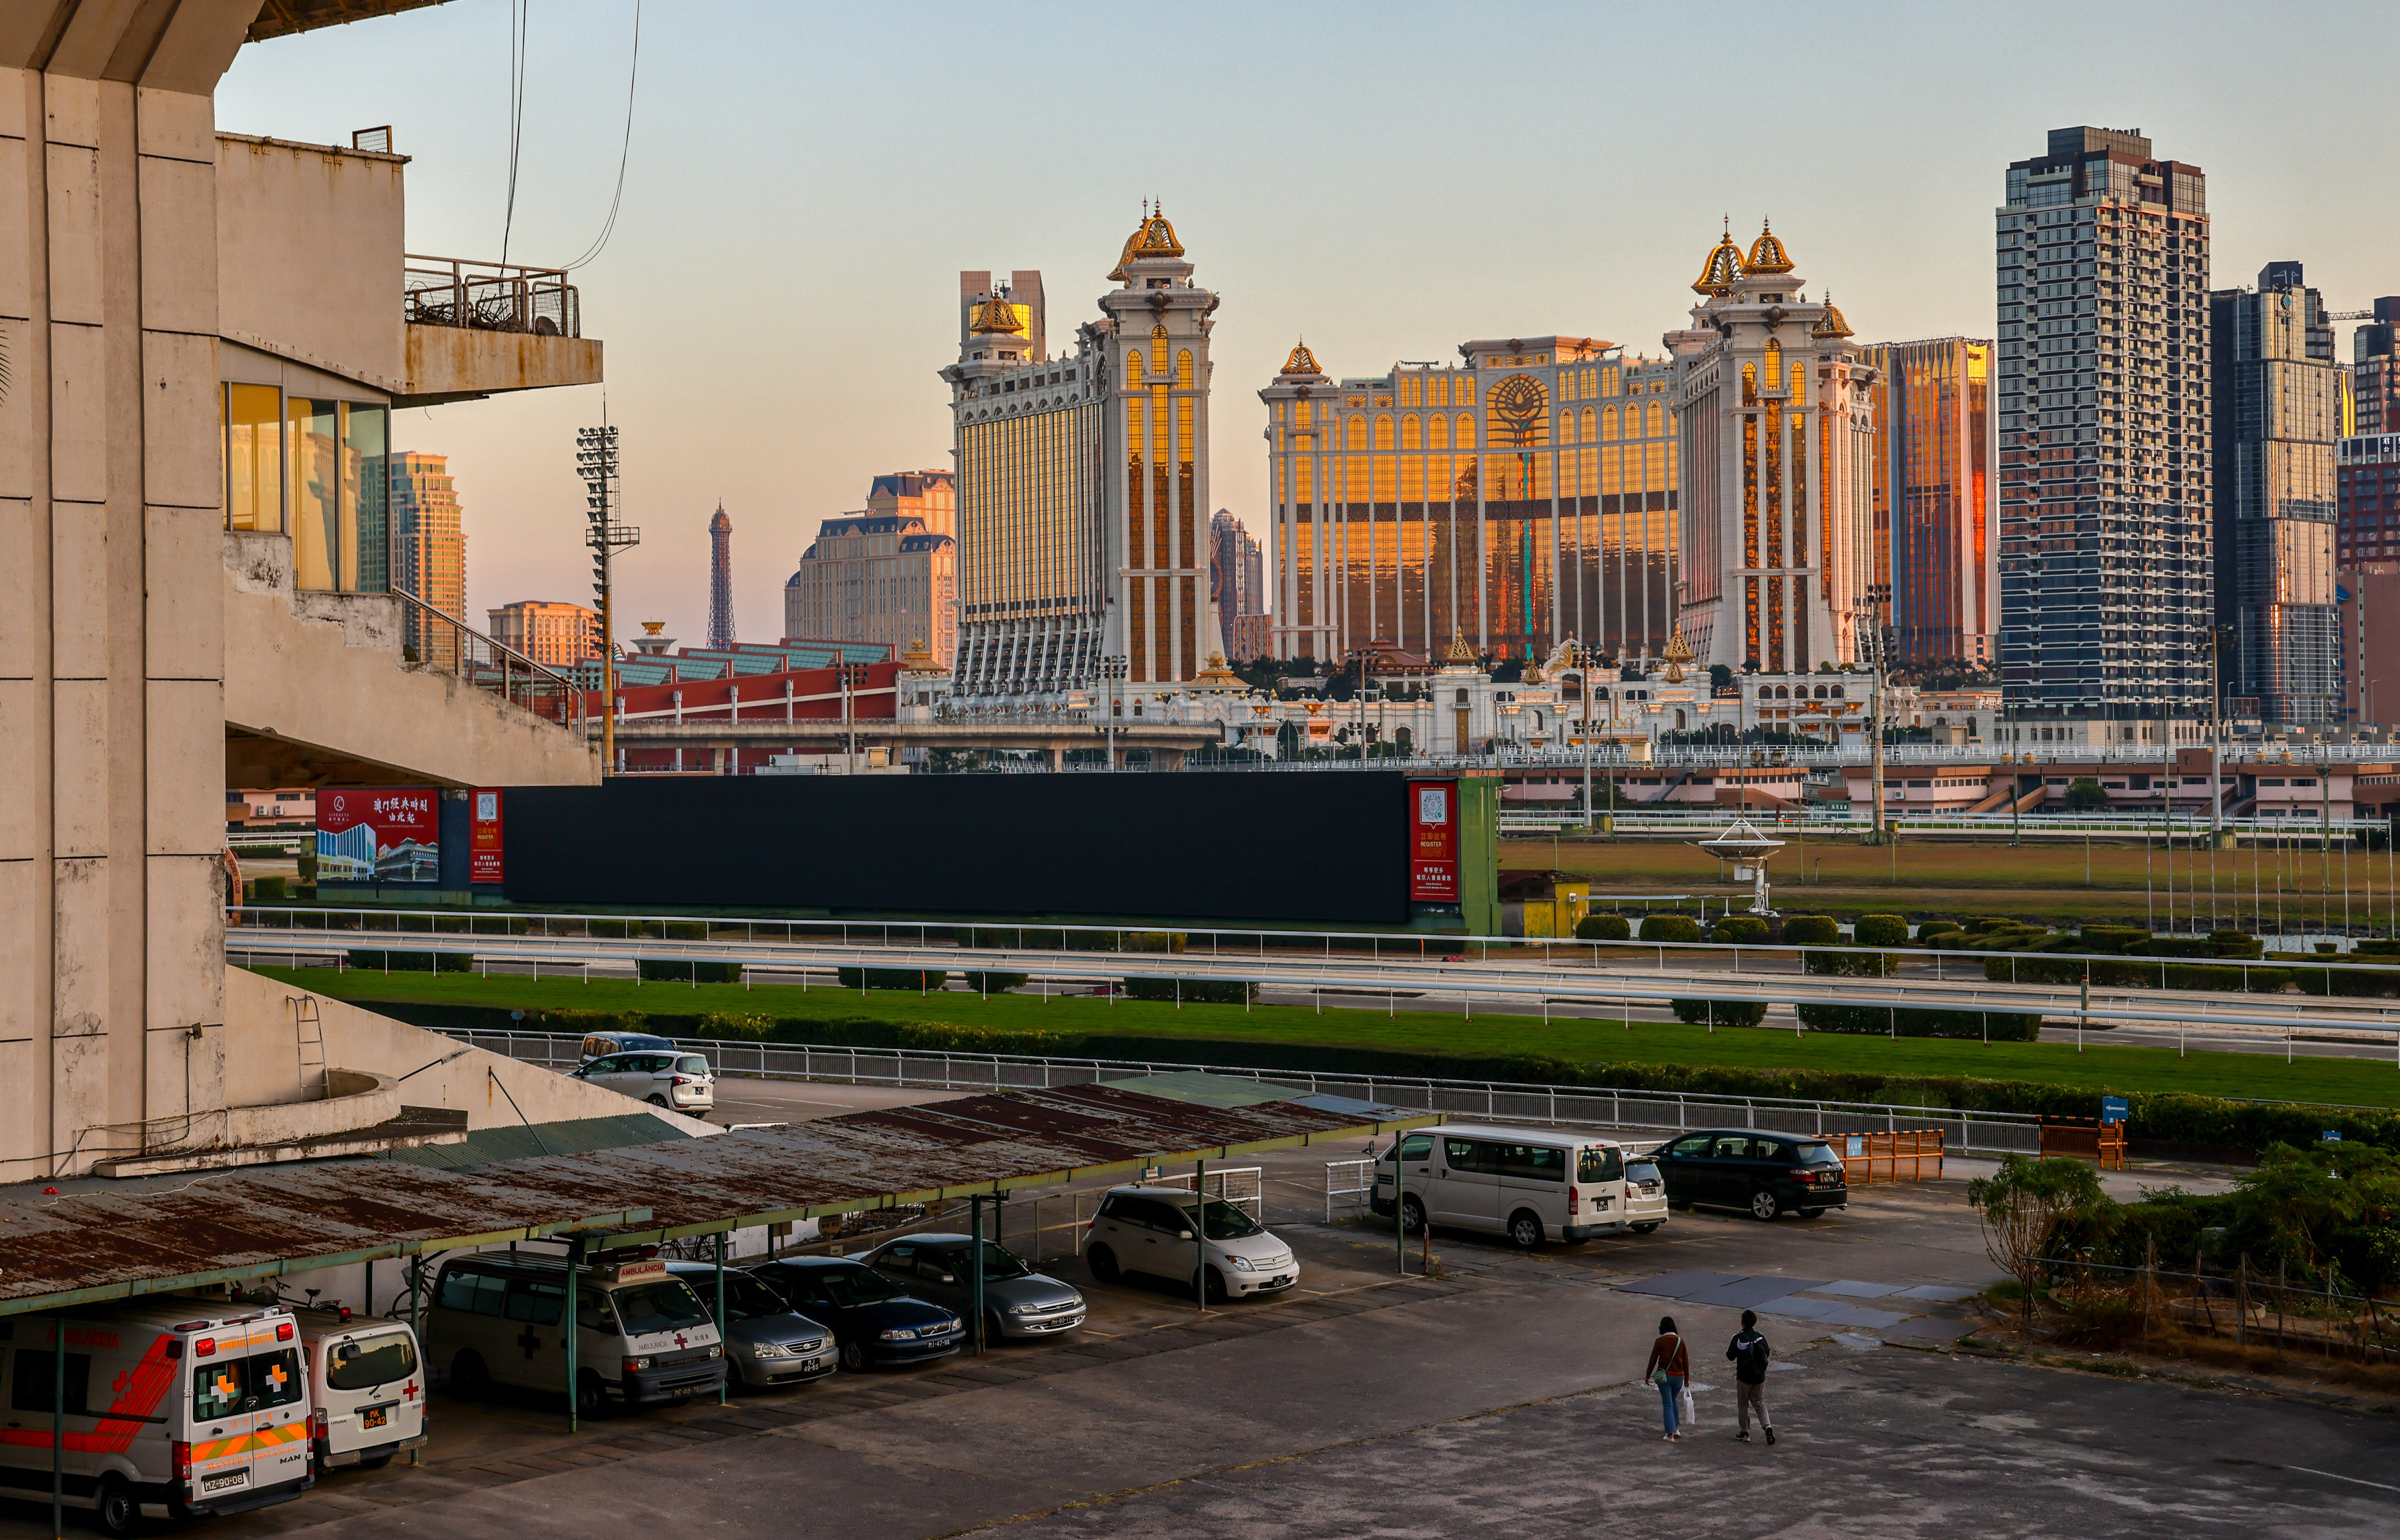 Racing in Macau will cease at the end of the March. Photo: Dickson Lee